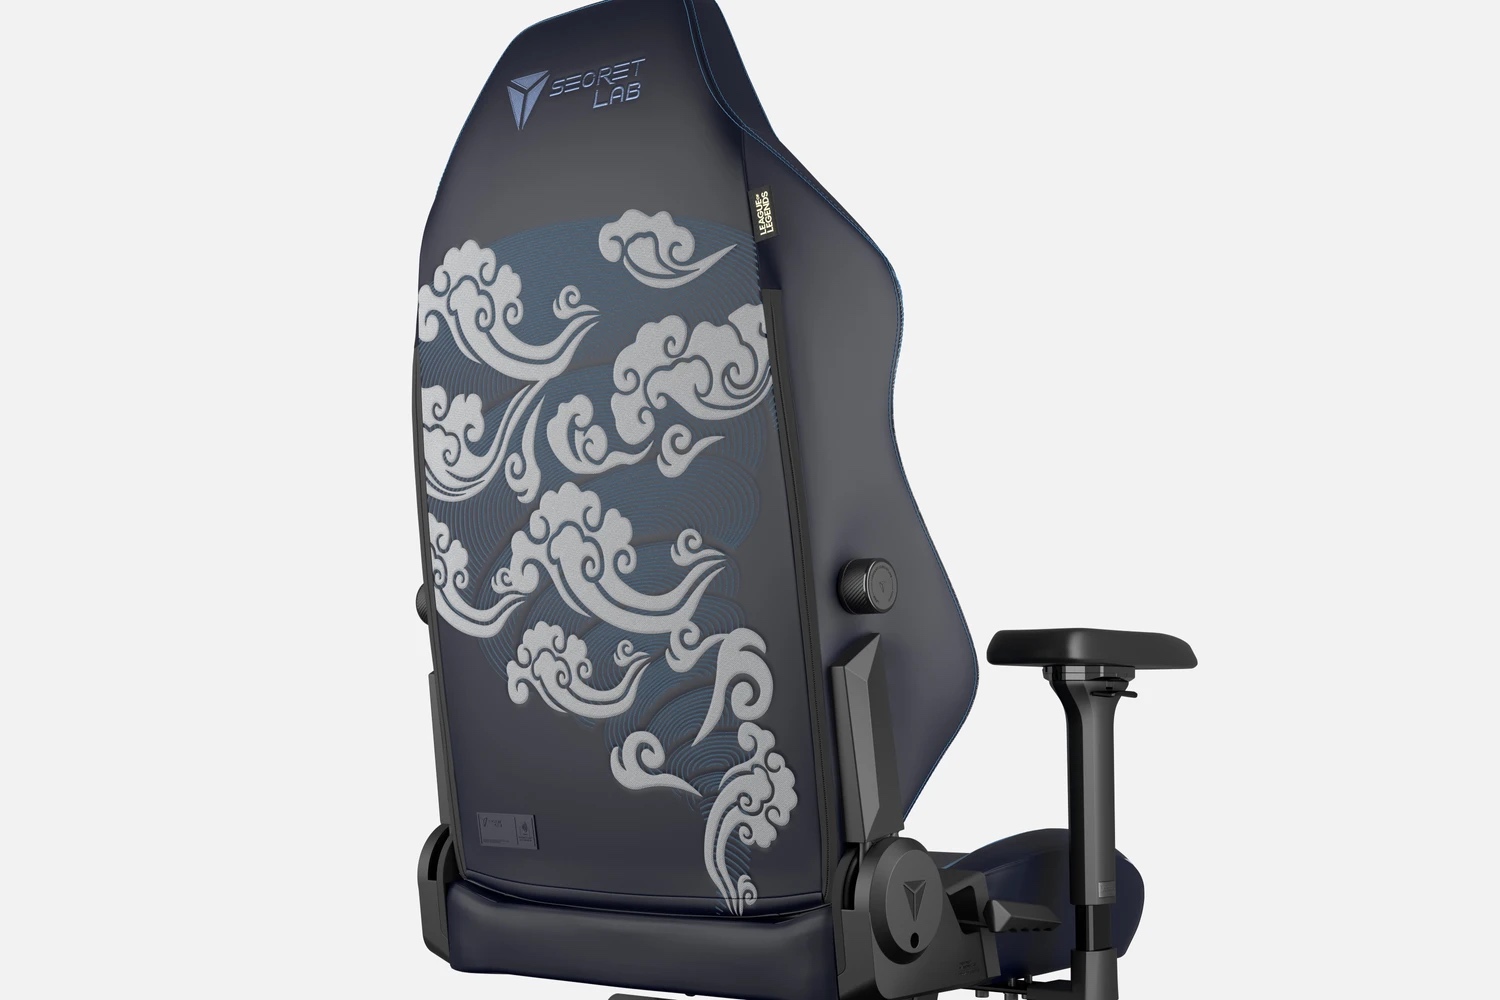 back-side-gaming-chair-yasuo